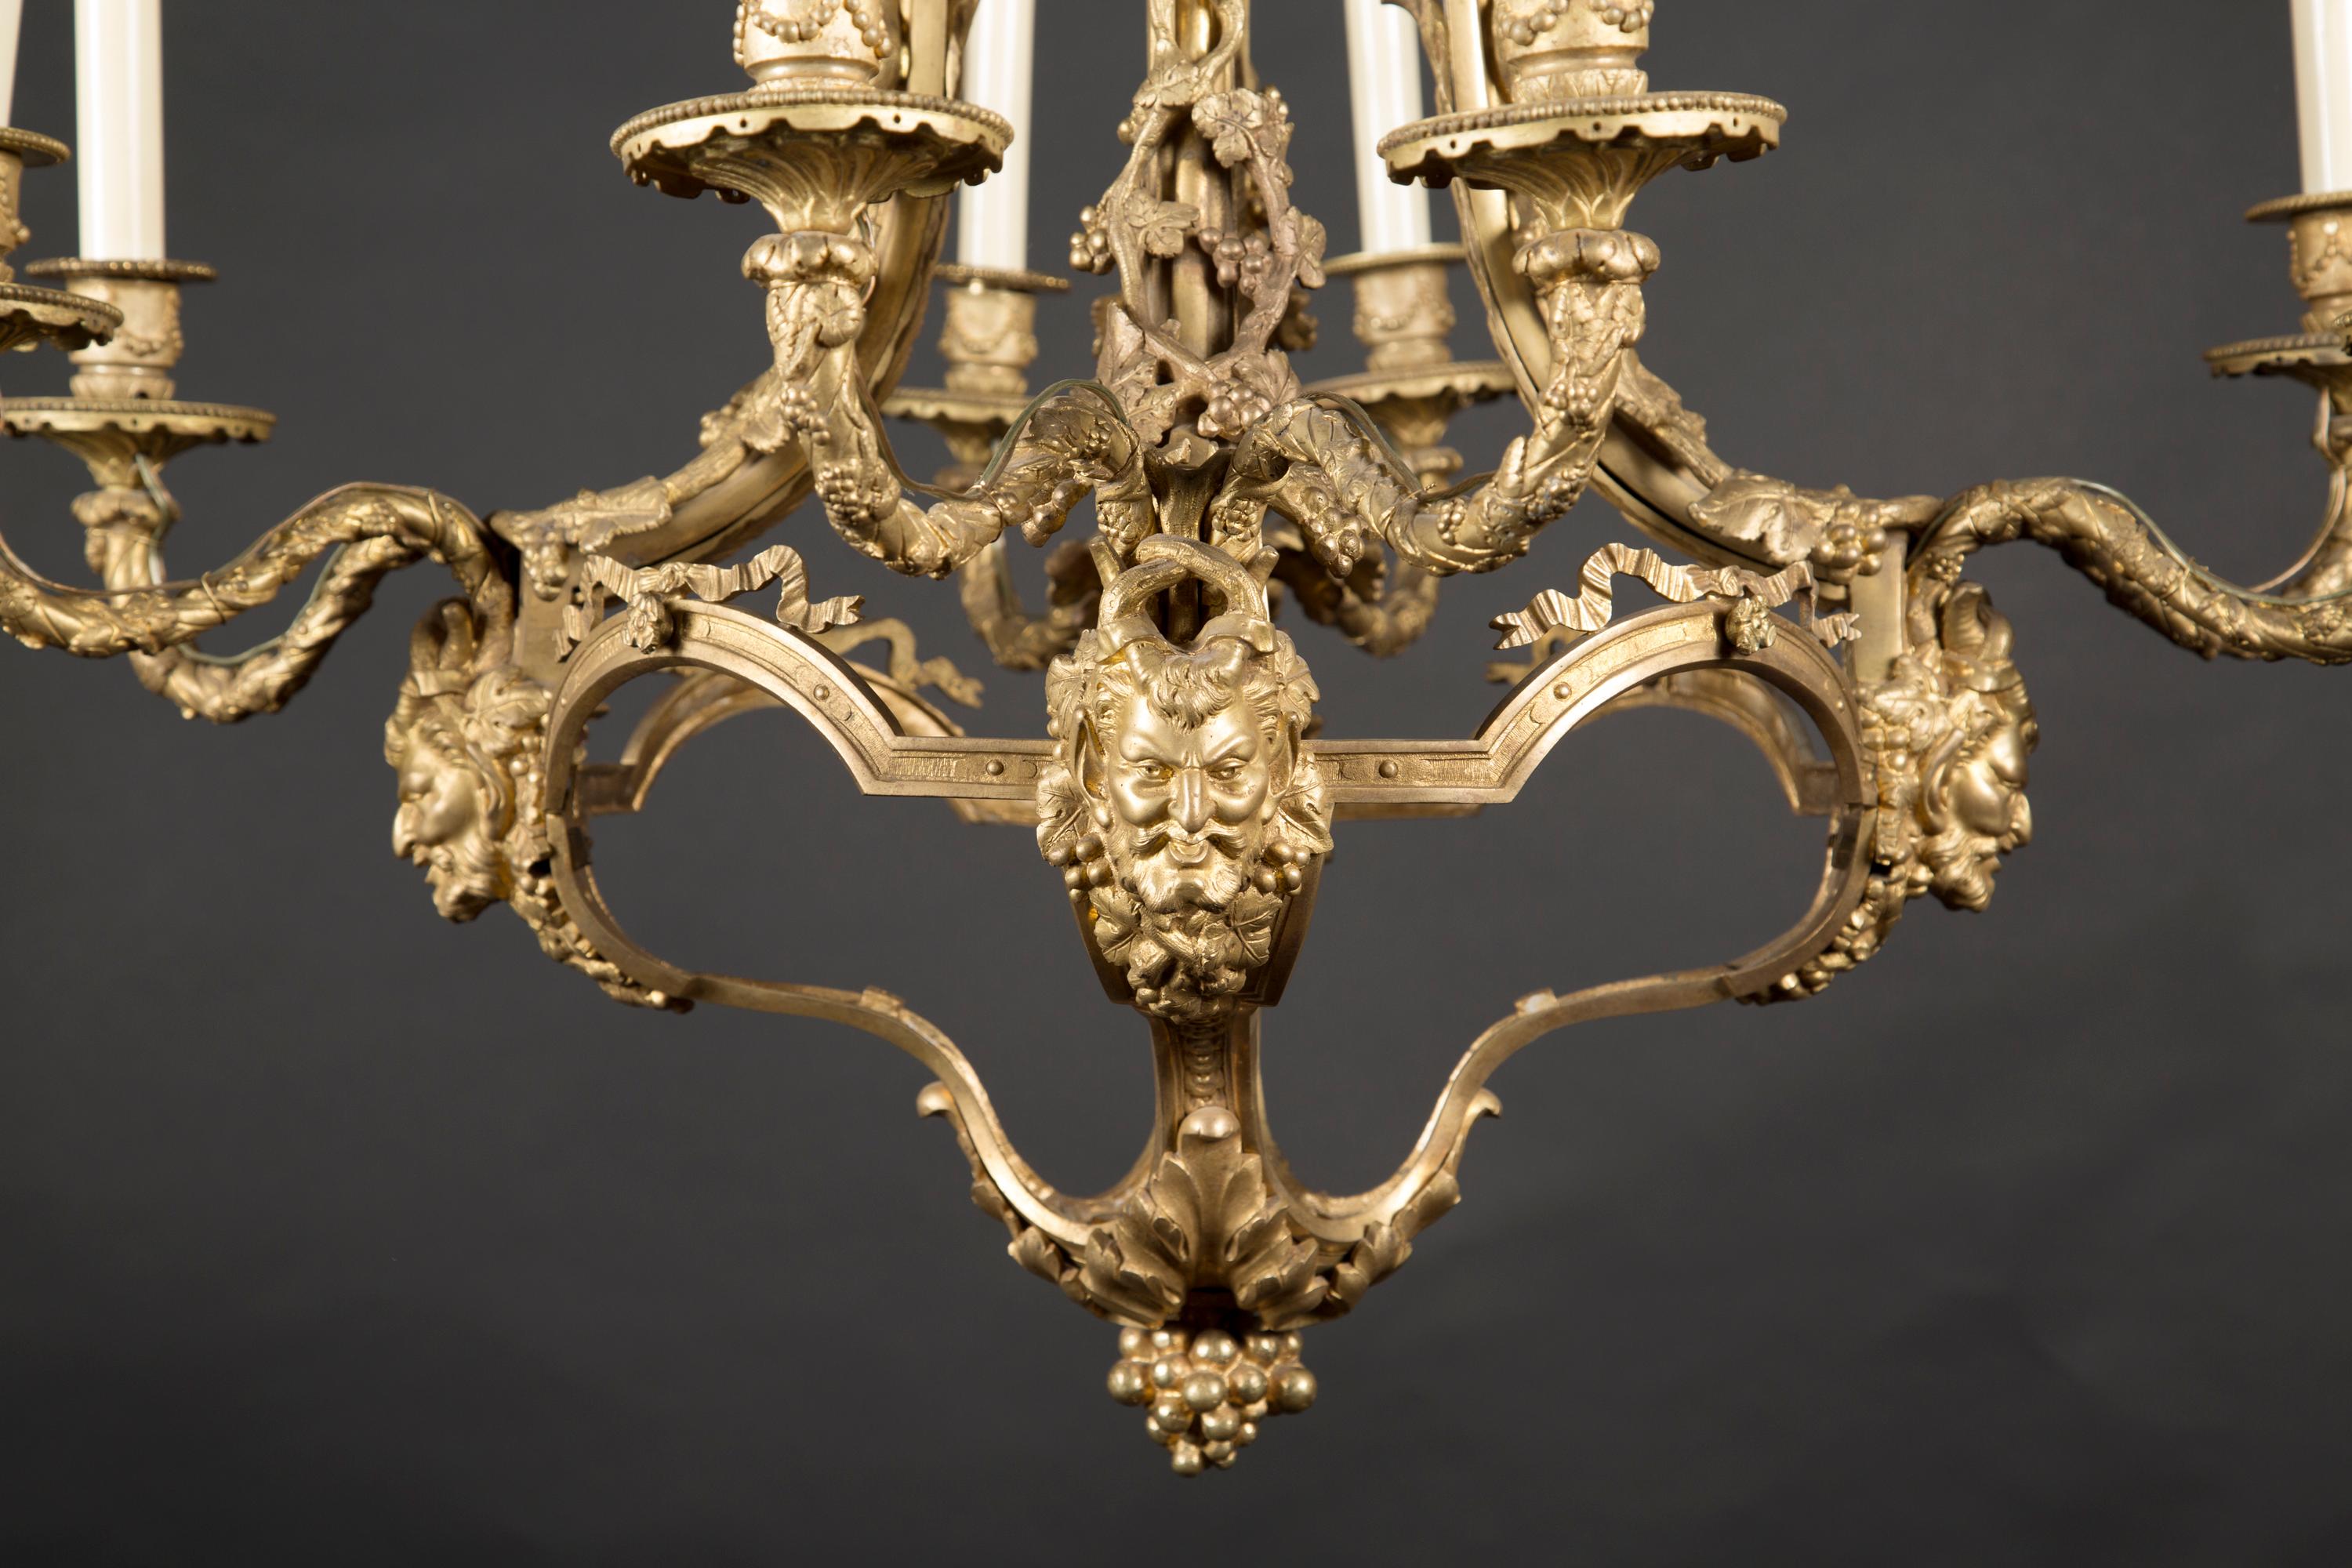 Bacchus Themed 19th Century French Louis XVI Bronze D’ore Chandelier In Excellent Condition For Sale In New Orleans, LA